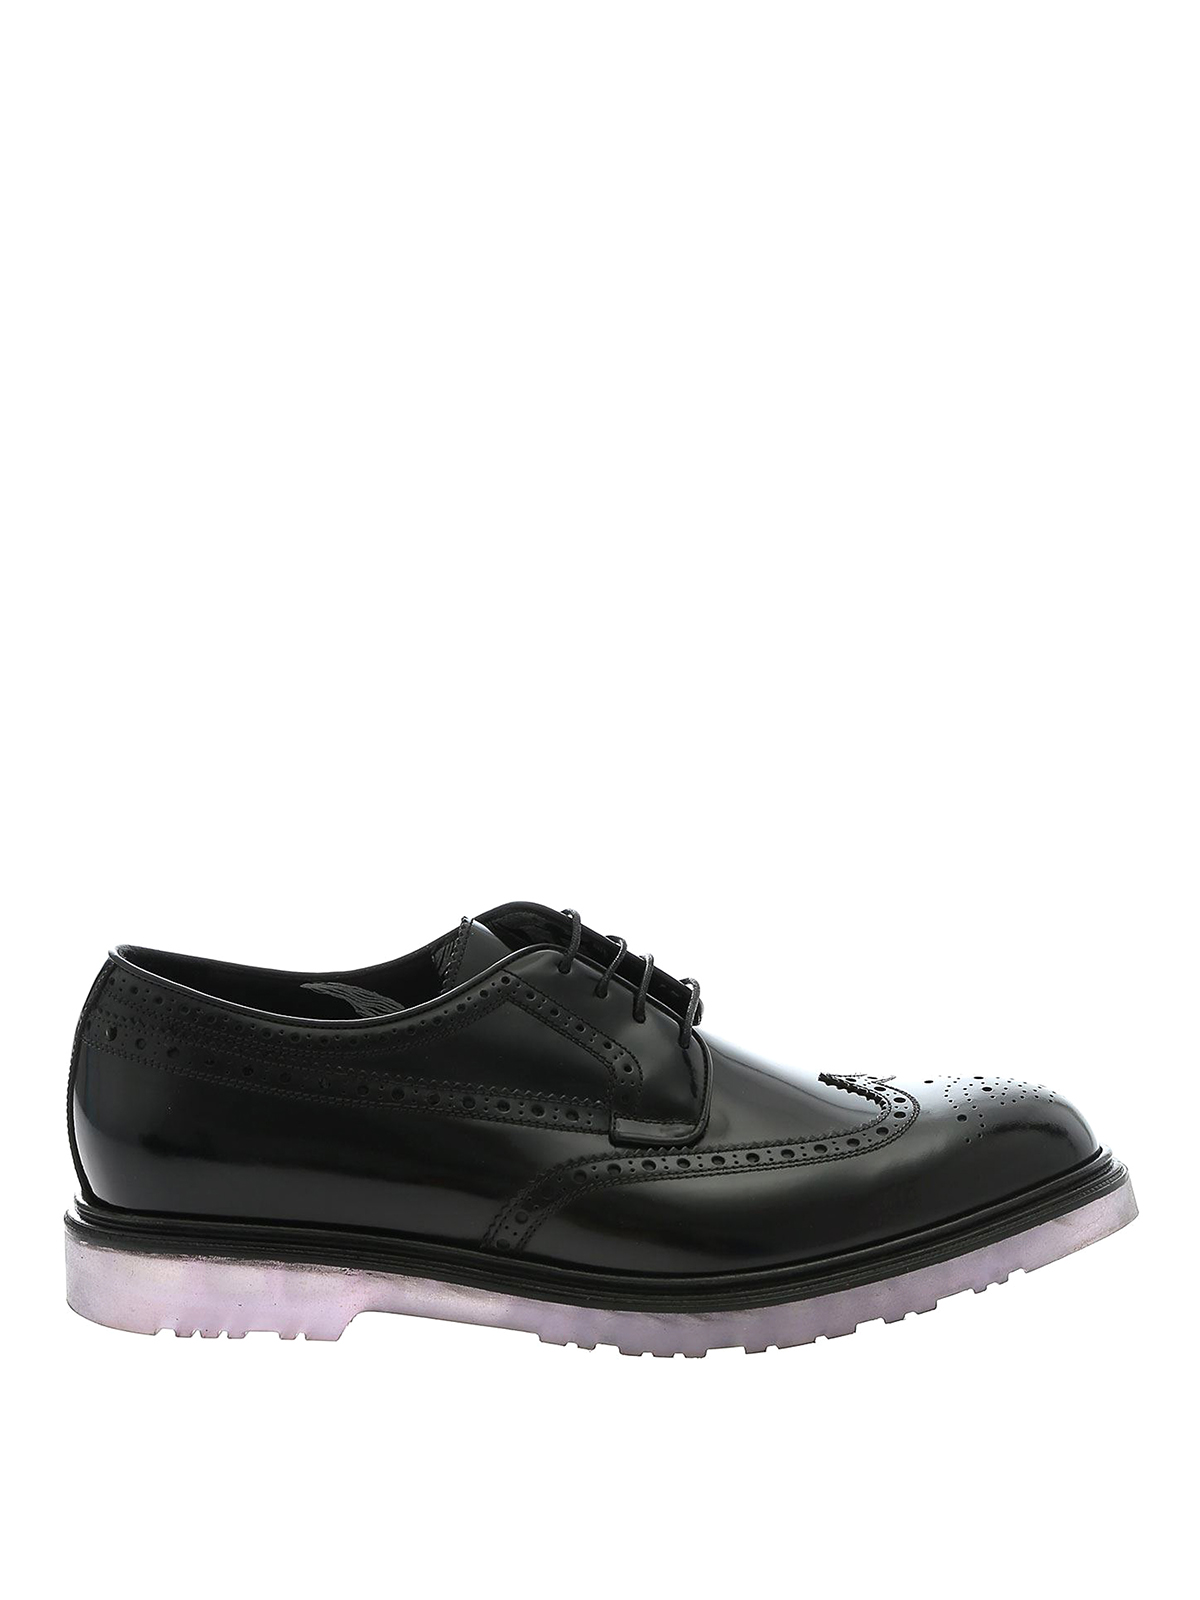 Paul Smith Crispin Shoes In Negro